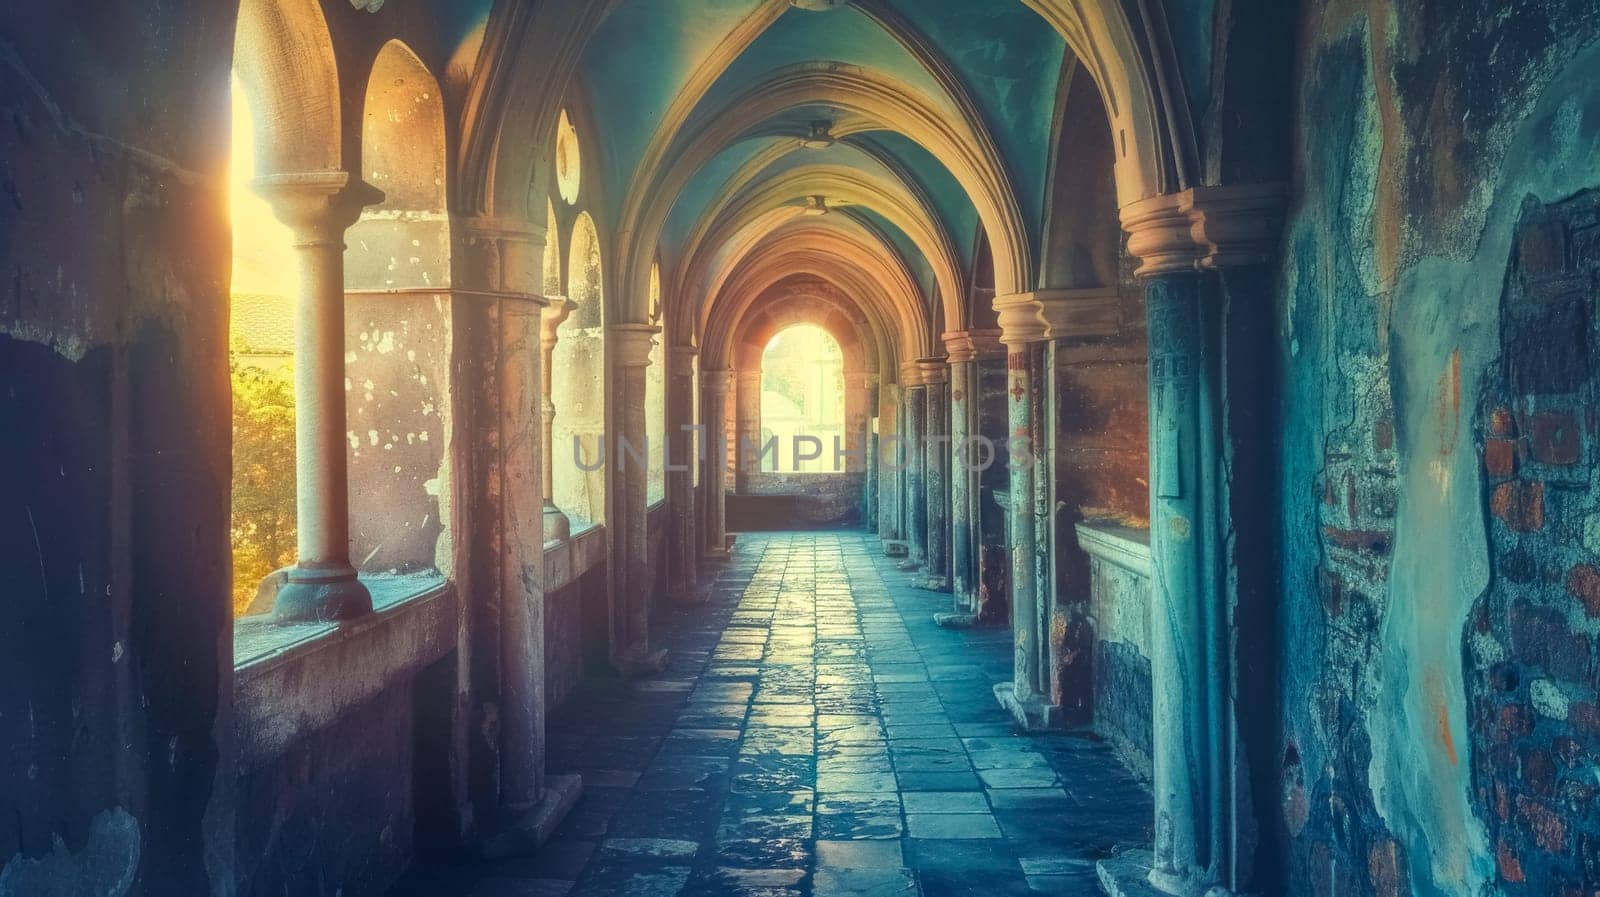 Warm sunlight filters through an arched walkway in an old stone cloister